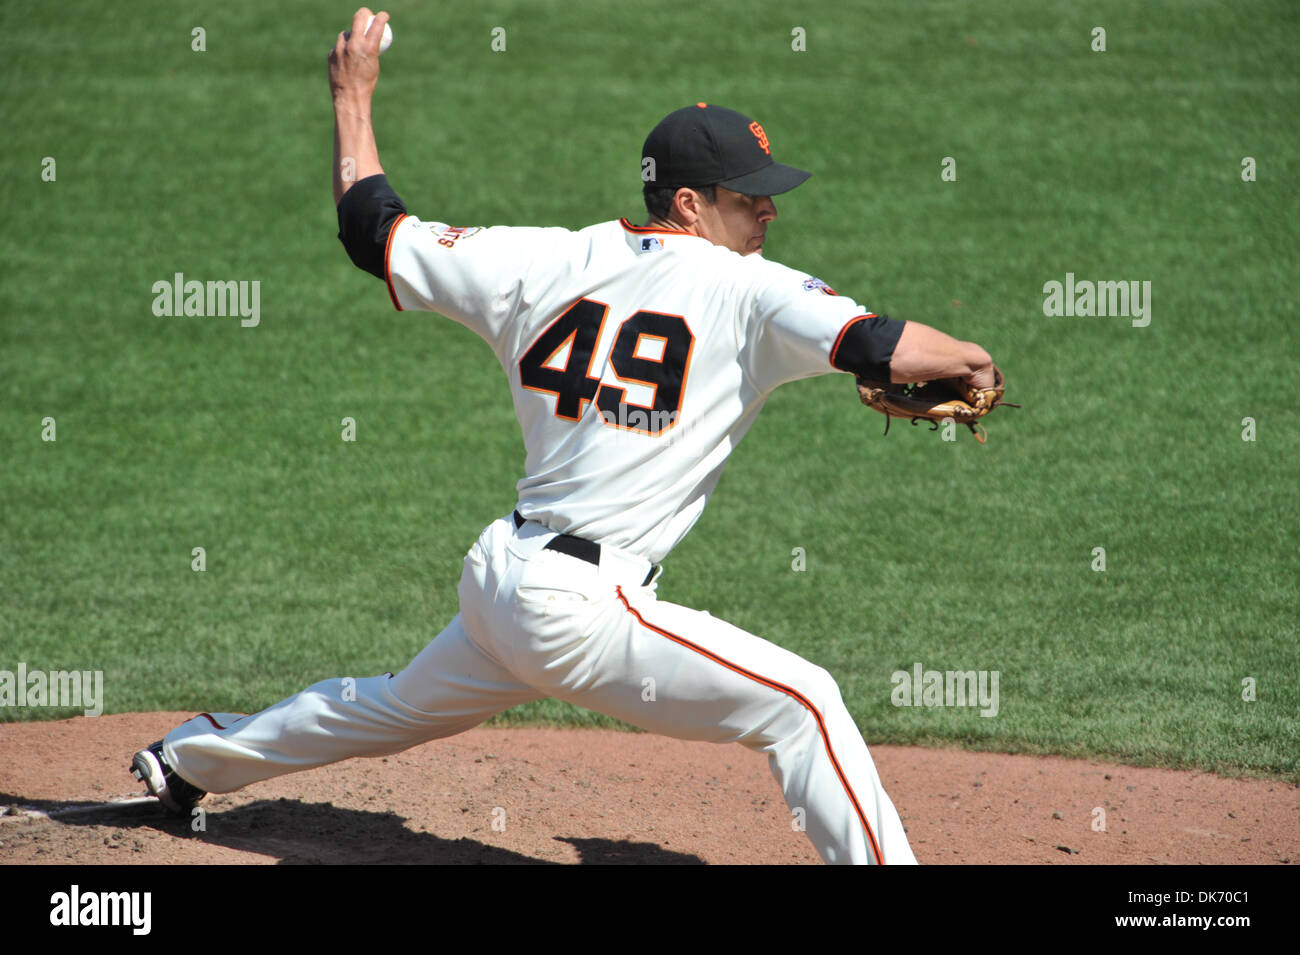 June 11, 2011 - San Francisco, California, U.S. - San Francisco Giants relief pitcher JAVIER LOPEZ (49) delivers during Saturday's game at AT&T park.  The Reds beat the Giants 10-2. (Credit Image: © Scott Beley/Southcreek Global/ZUMAPRESS.com) Stock Photo